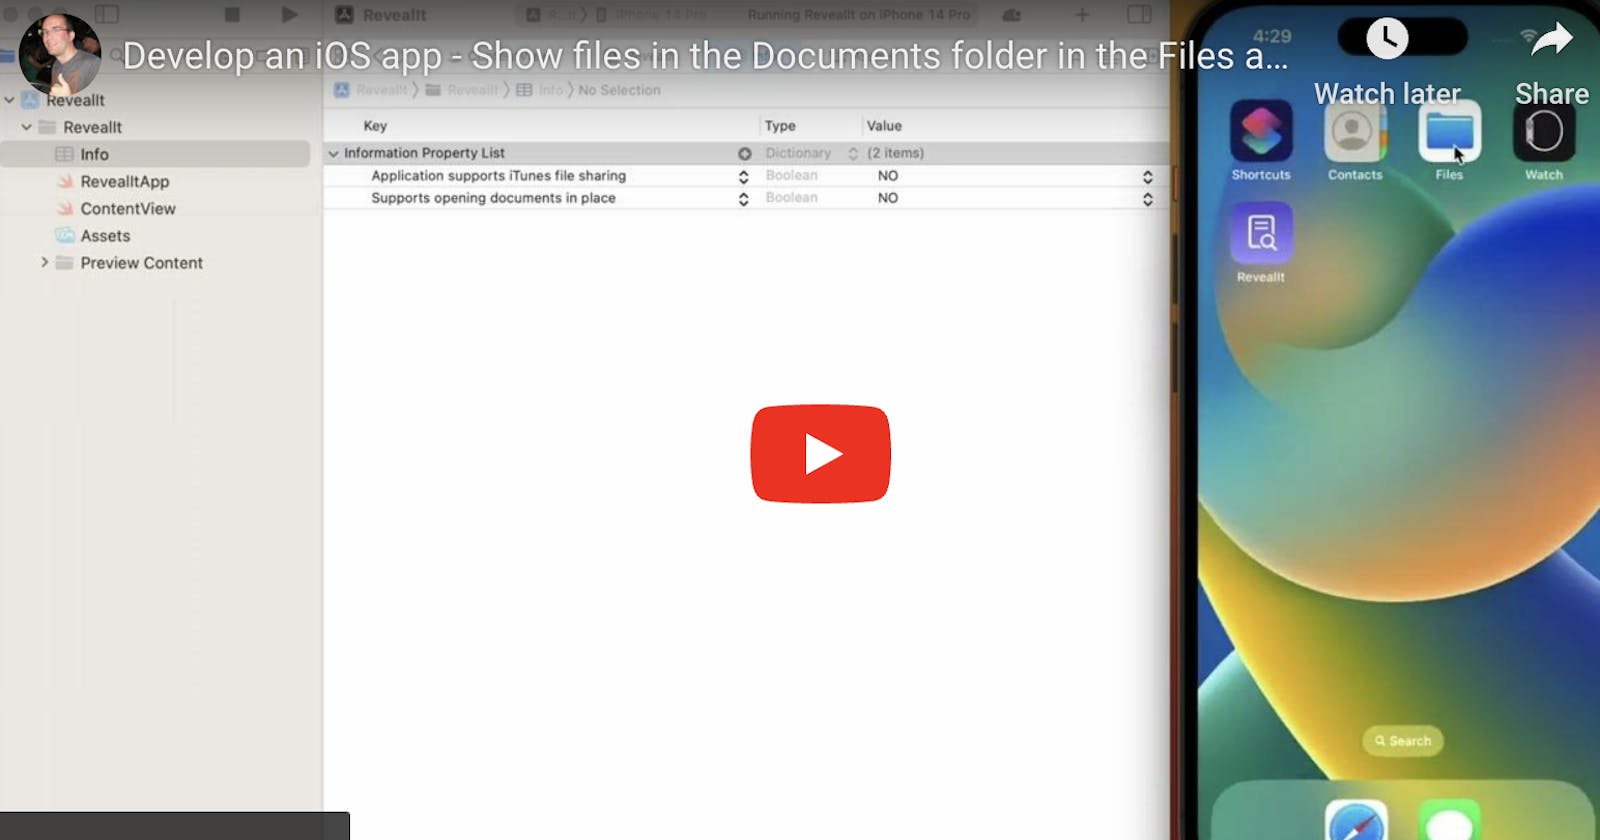 Make your app's files user-visible on the iPhone